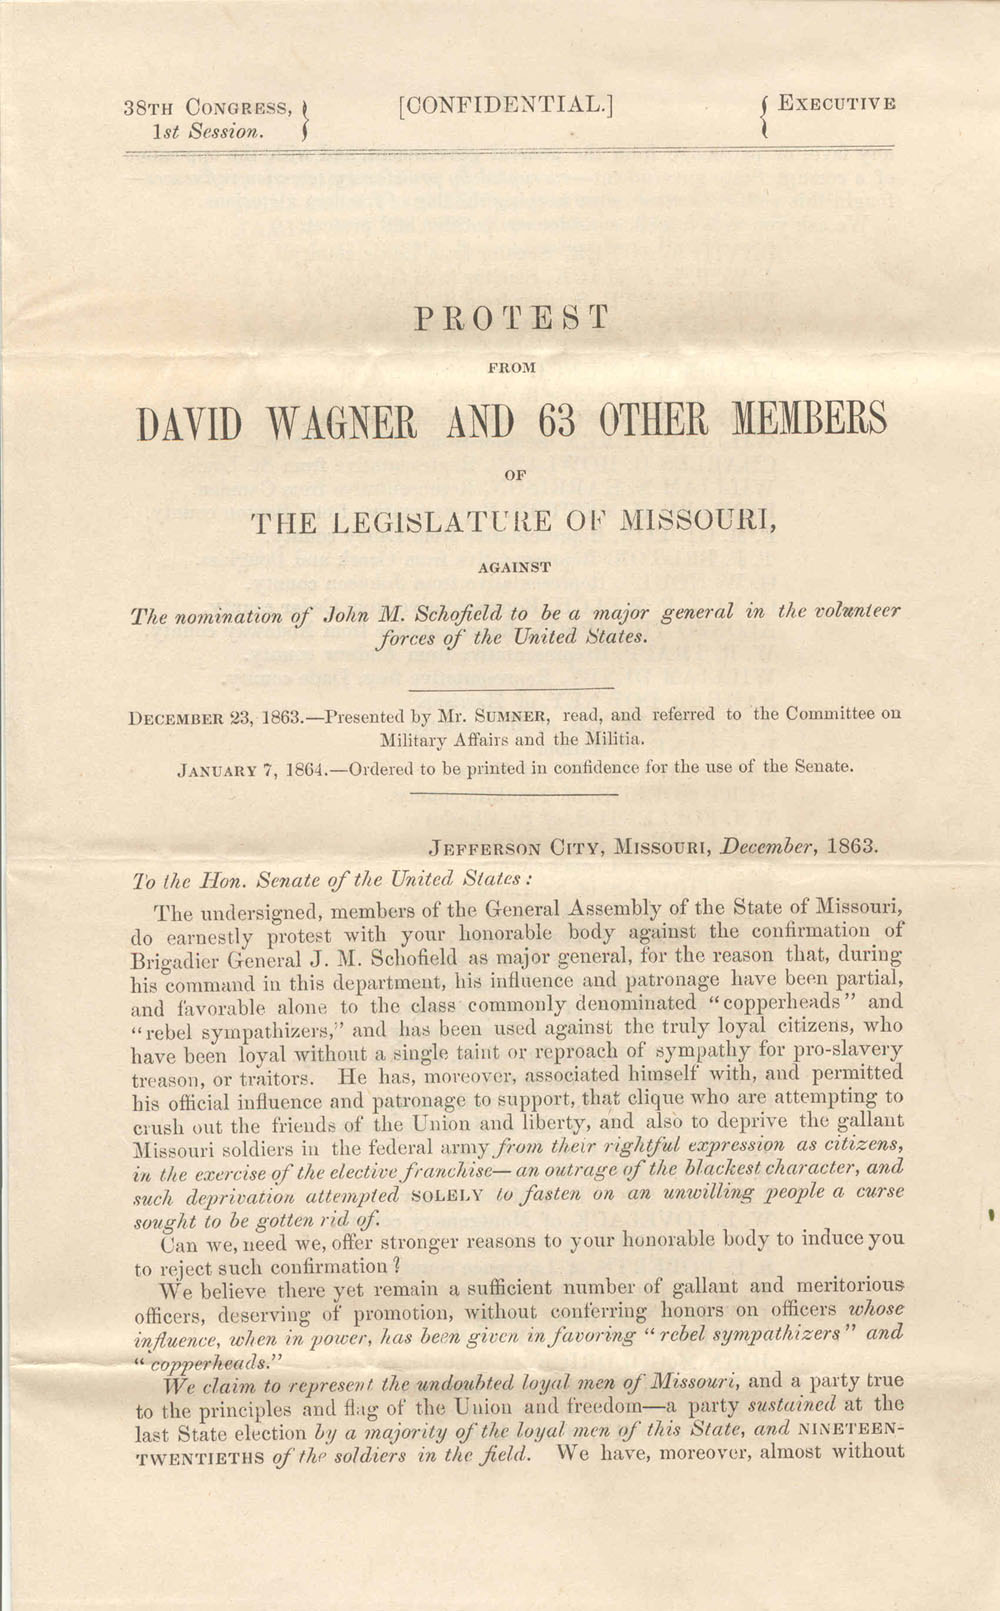 printed petition from the state legislature of Missouri protests Schofield's nomination as major general of volunteers